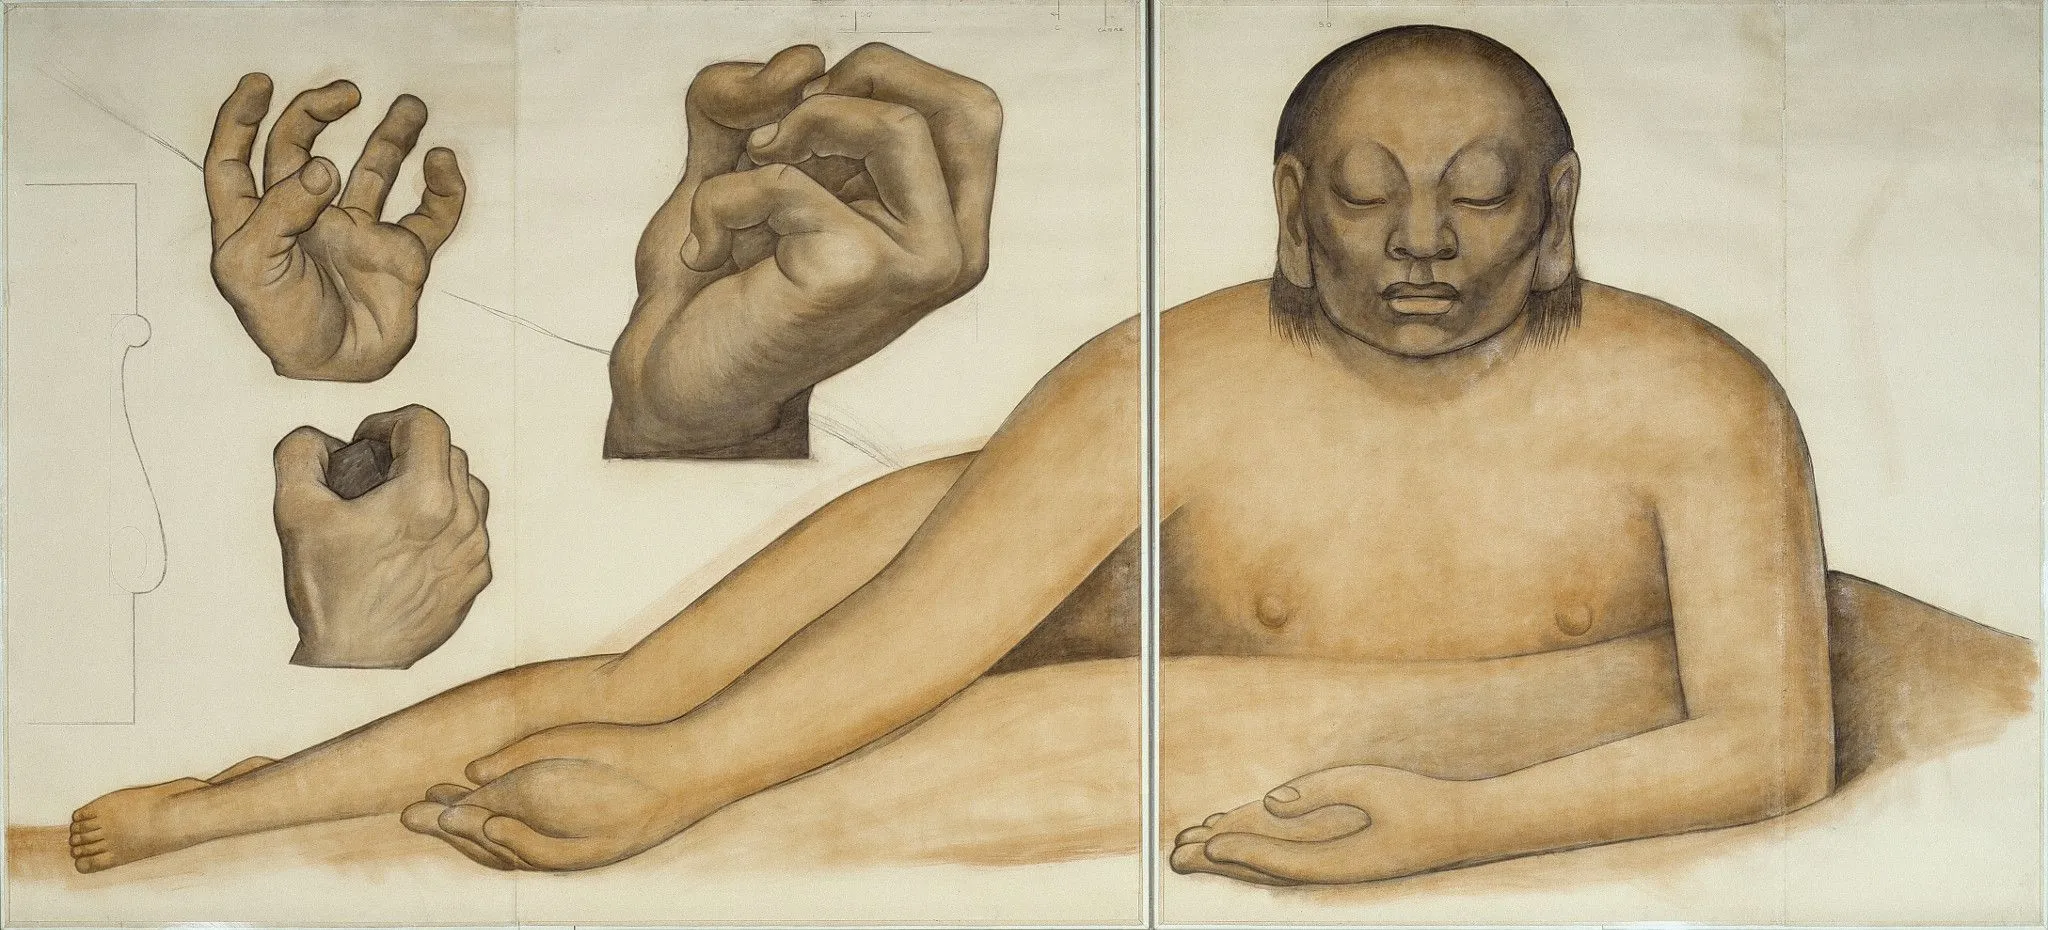 Diego M. Rivera, Figure Representing the Yellow Race, 1932, charcoal and pigment on two joined sheets of off-white wove paper. Detroit Institute of Arts, Gift of the artist, 33.42.